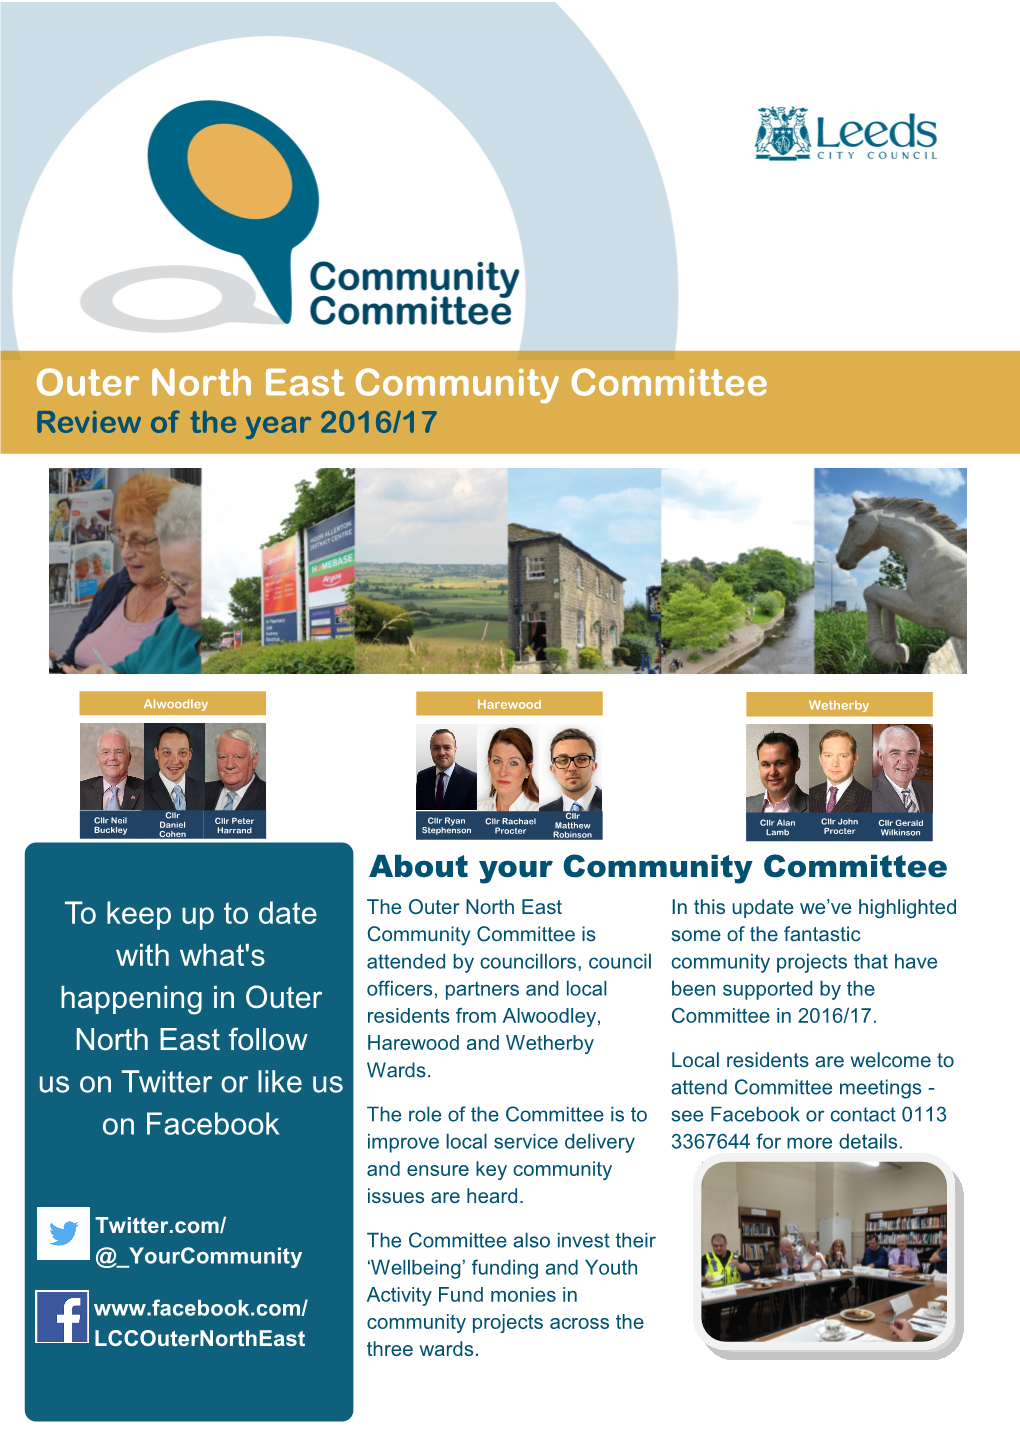 Outer North East Community Committee Review of the Year 2016/17